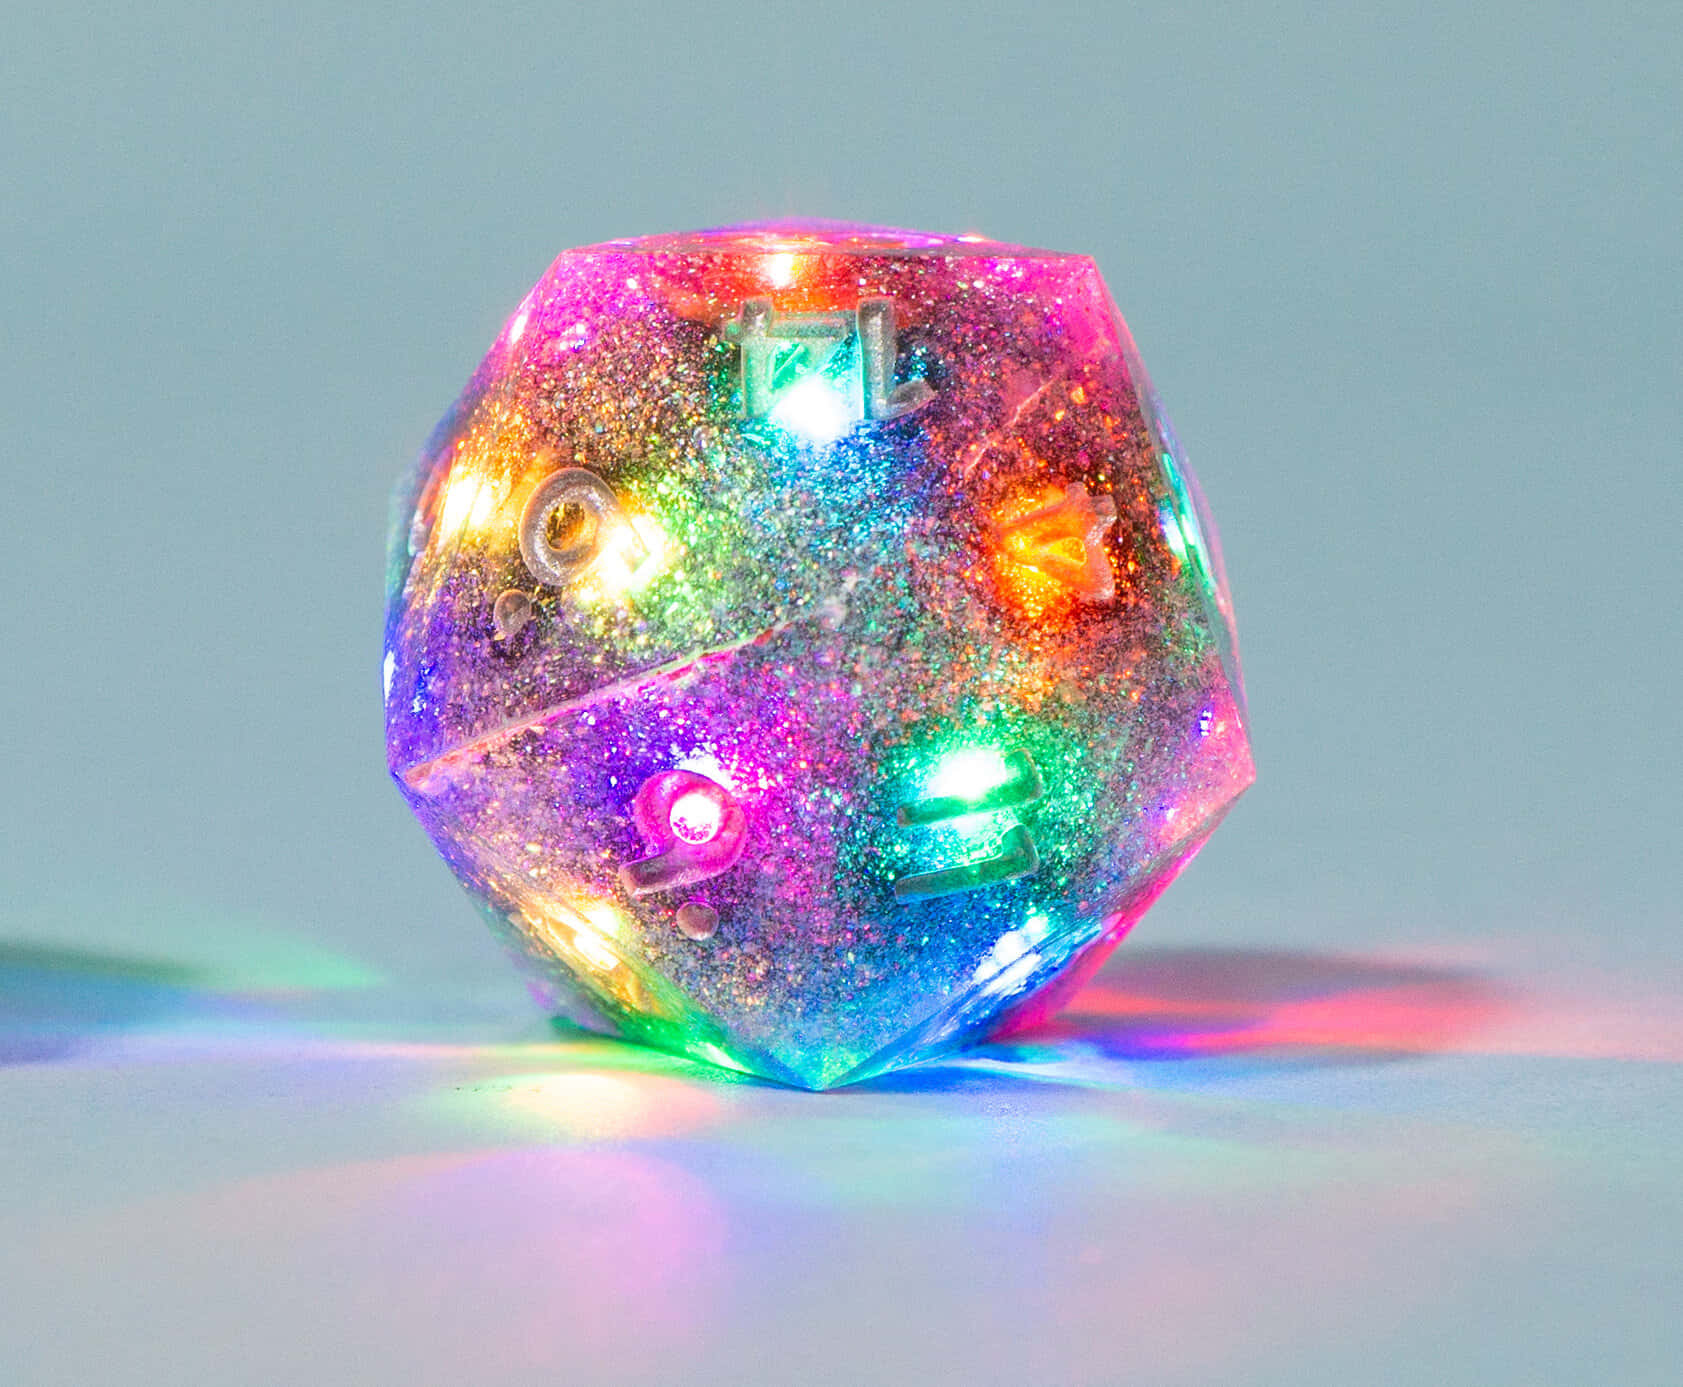 A Colorful D20 Dice With Lights On It